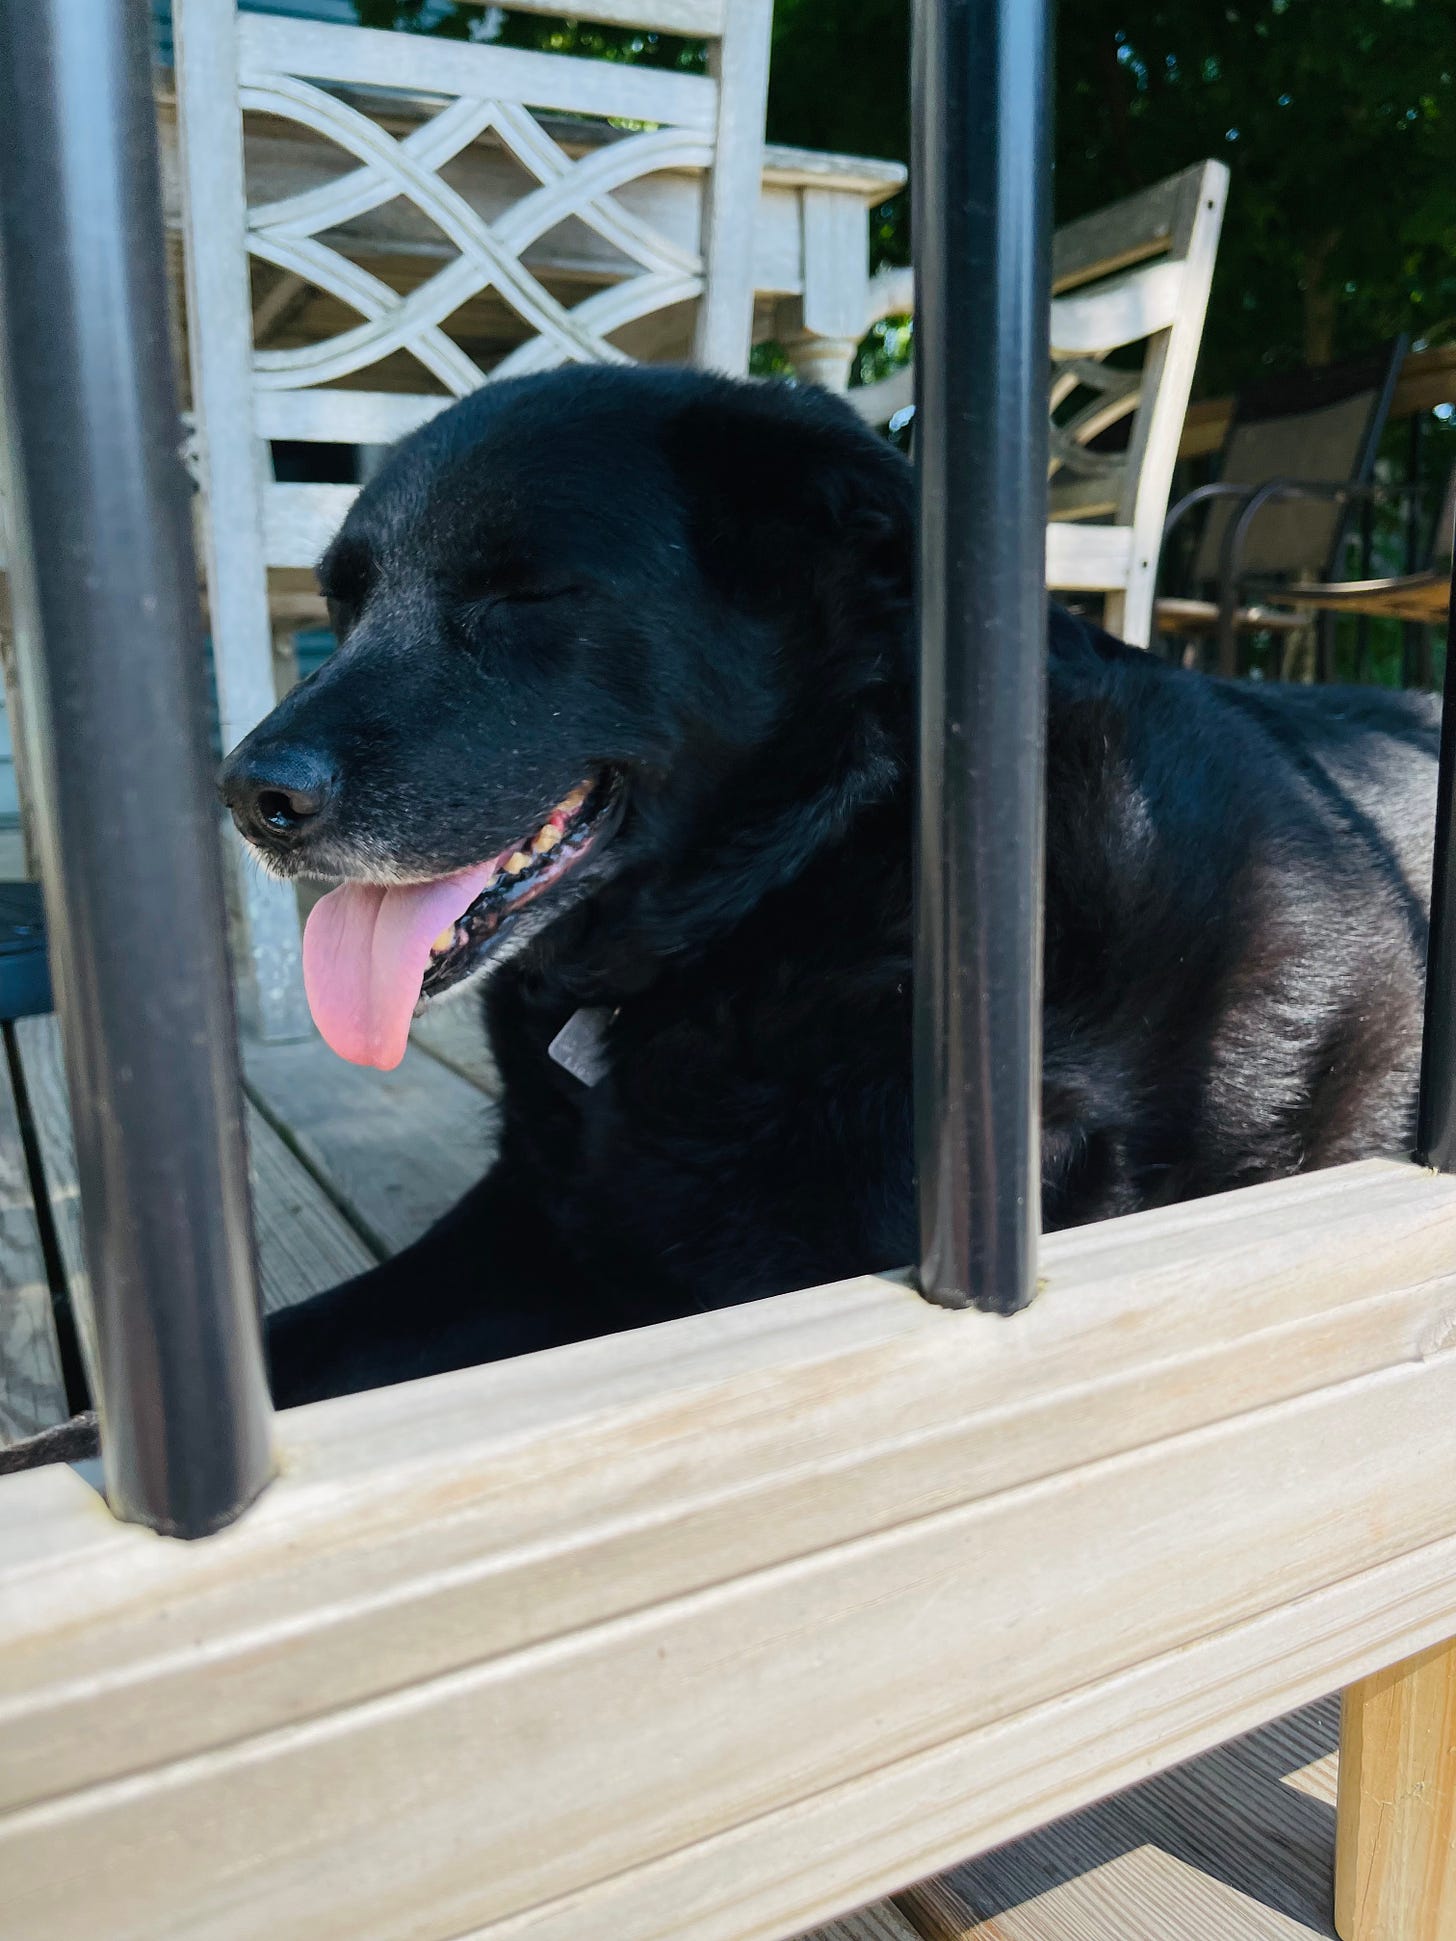 Smiling dog, eyes closed, on a porch